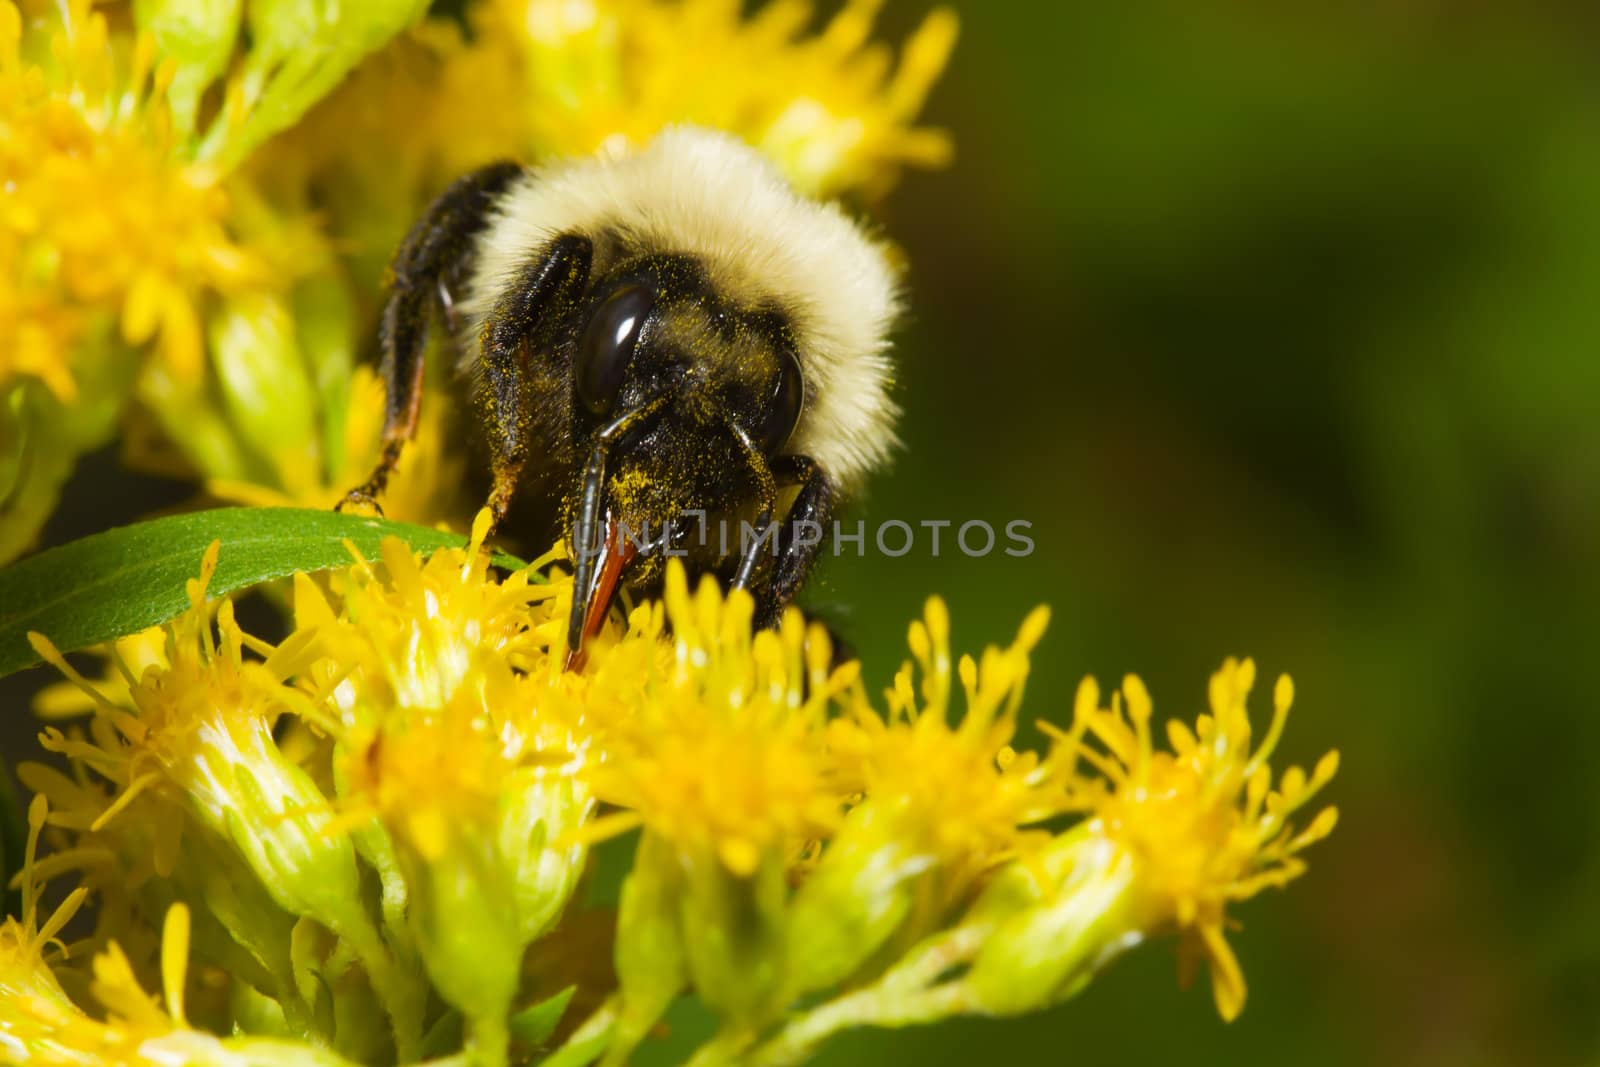 Golden Northern Bumblebee resting on a yellow flower.